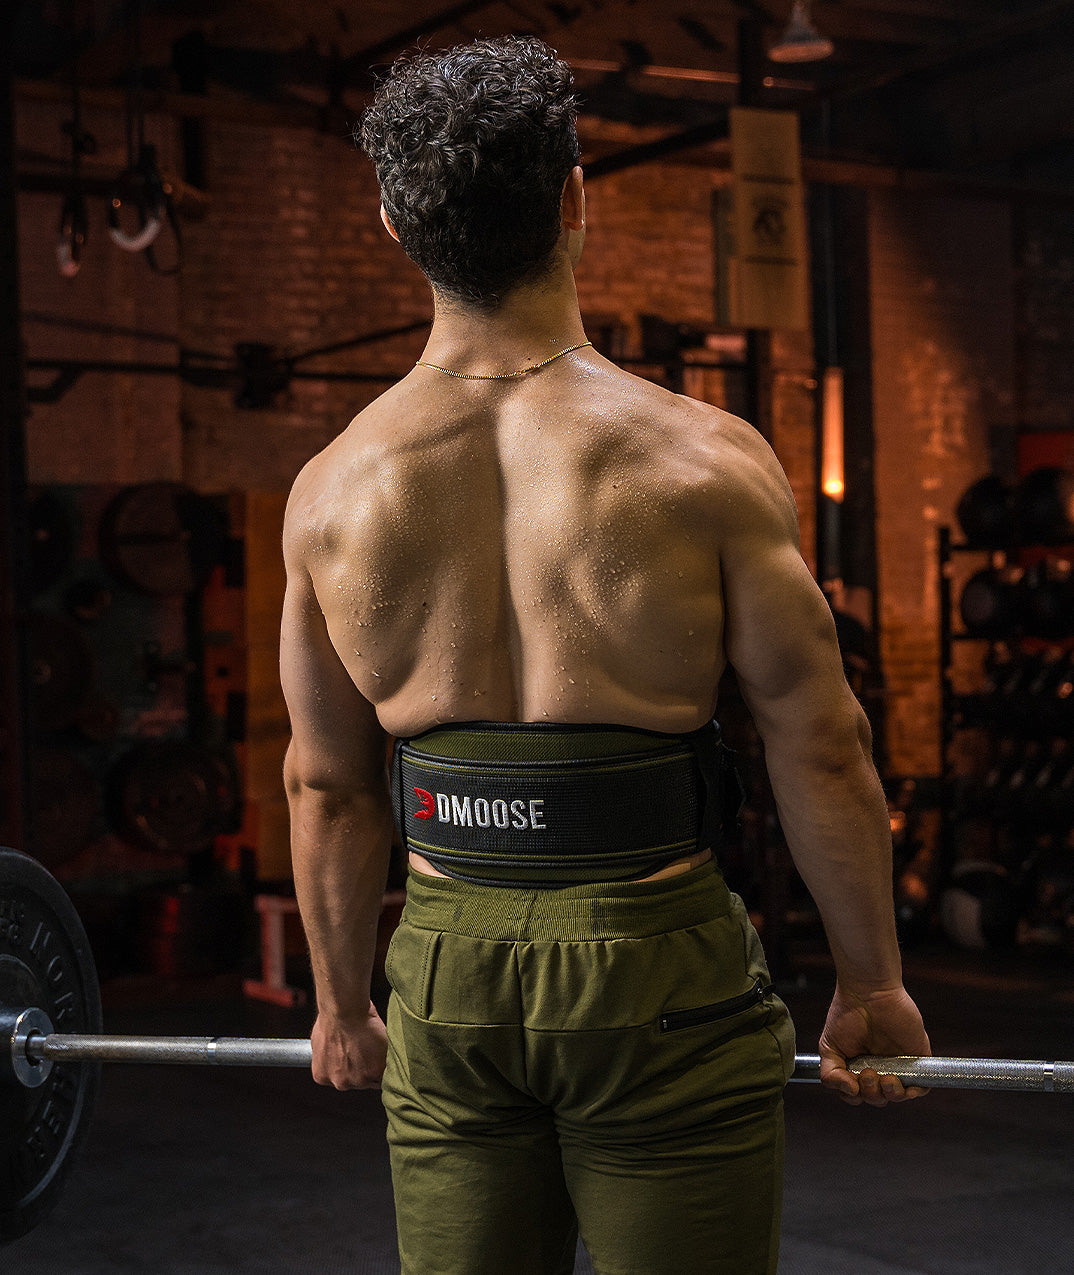 Experience Optimal Support with DMoose 2-in-1 Neoprene Belt for